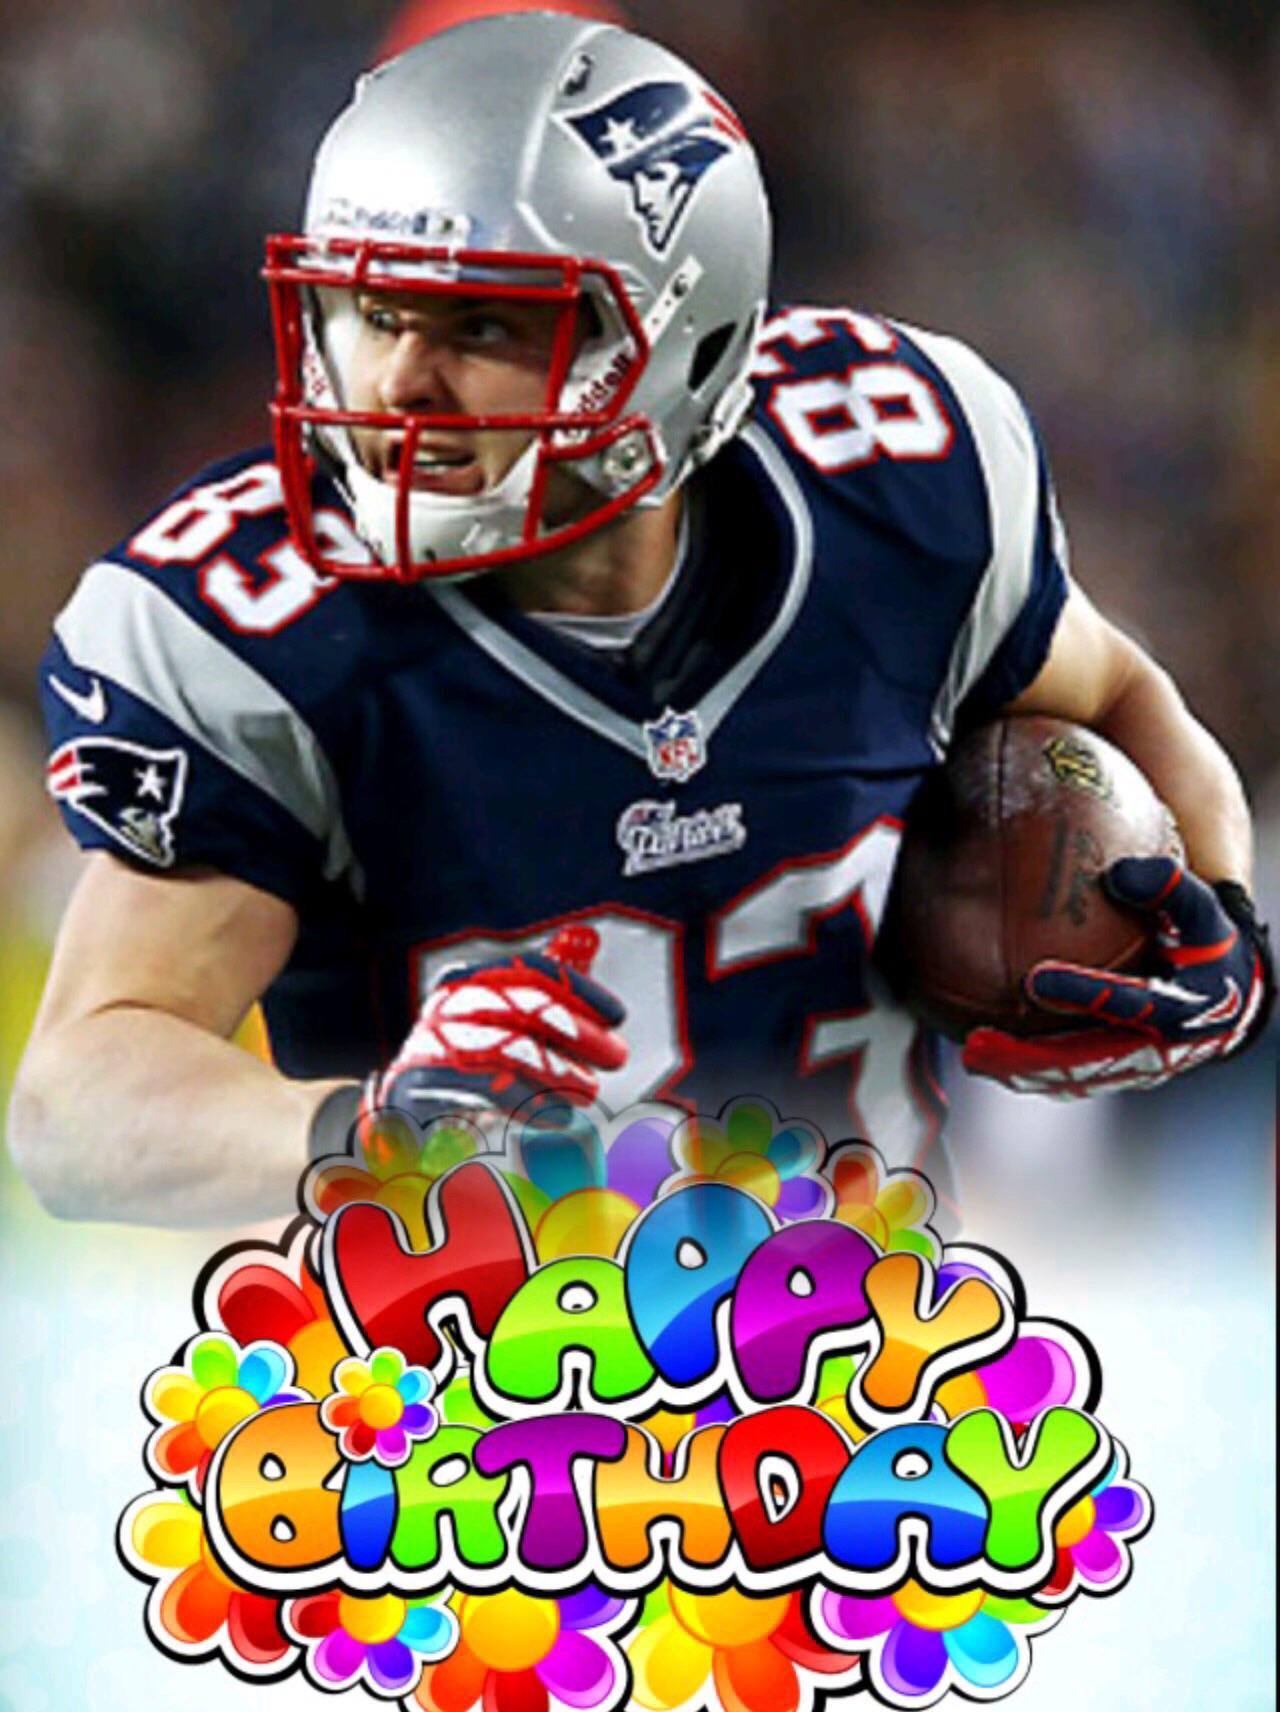 Happy Birthday to Wes Welker! He has been to 5 Pro Bowls, been named an All-Pro twice, and holds 15 NFL records! 